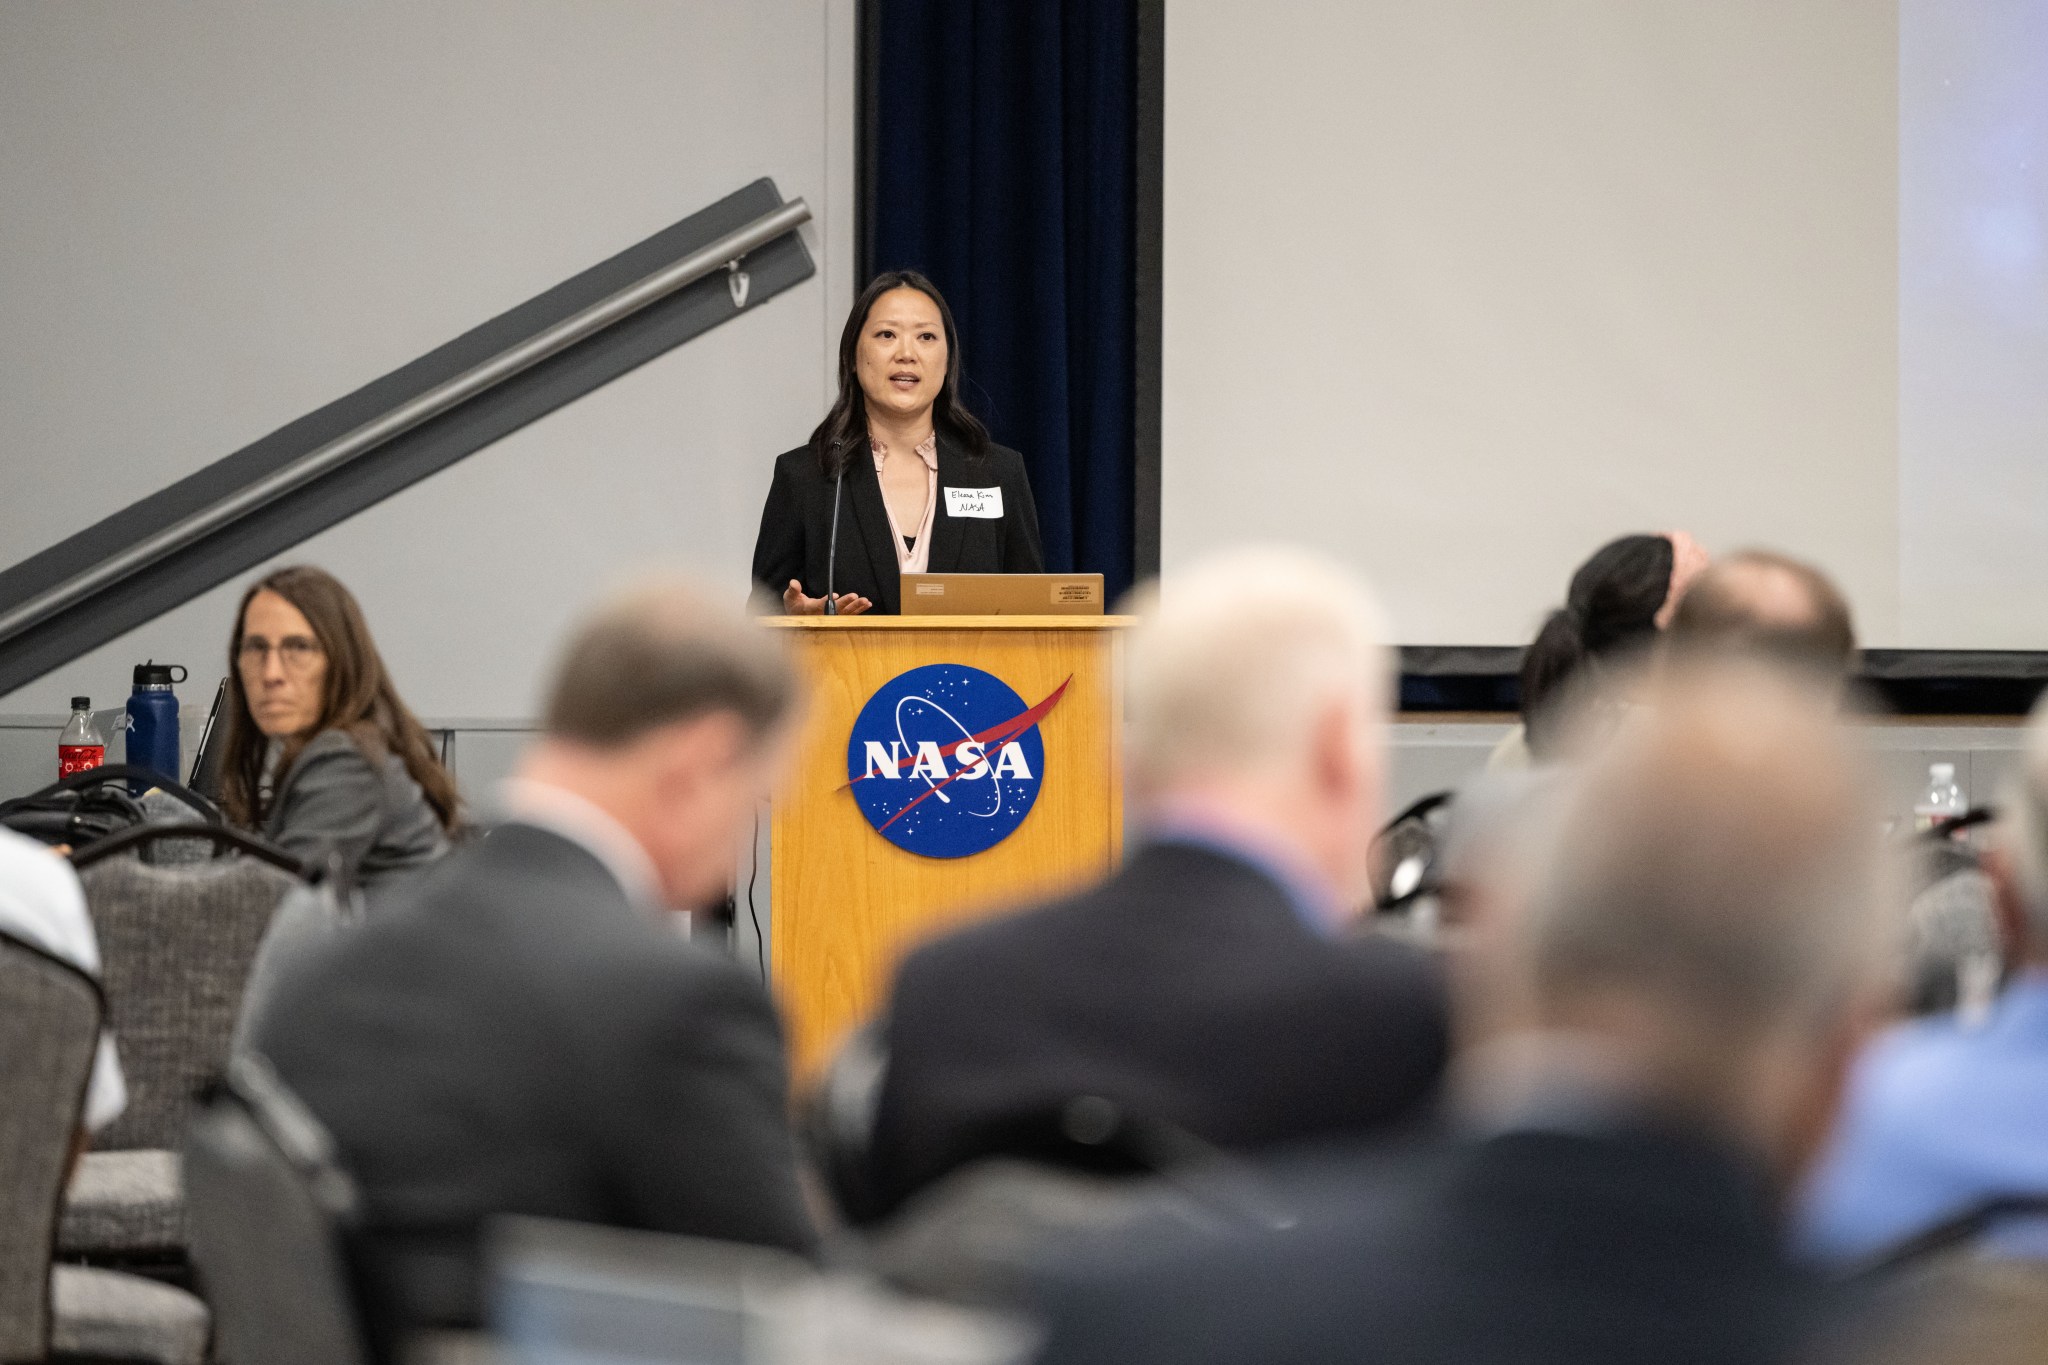 A woman wearing a pink blouse and a black blazer stands at a podium with the NASA meatball logo attached to the front. The woman is speaking to a group of people.